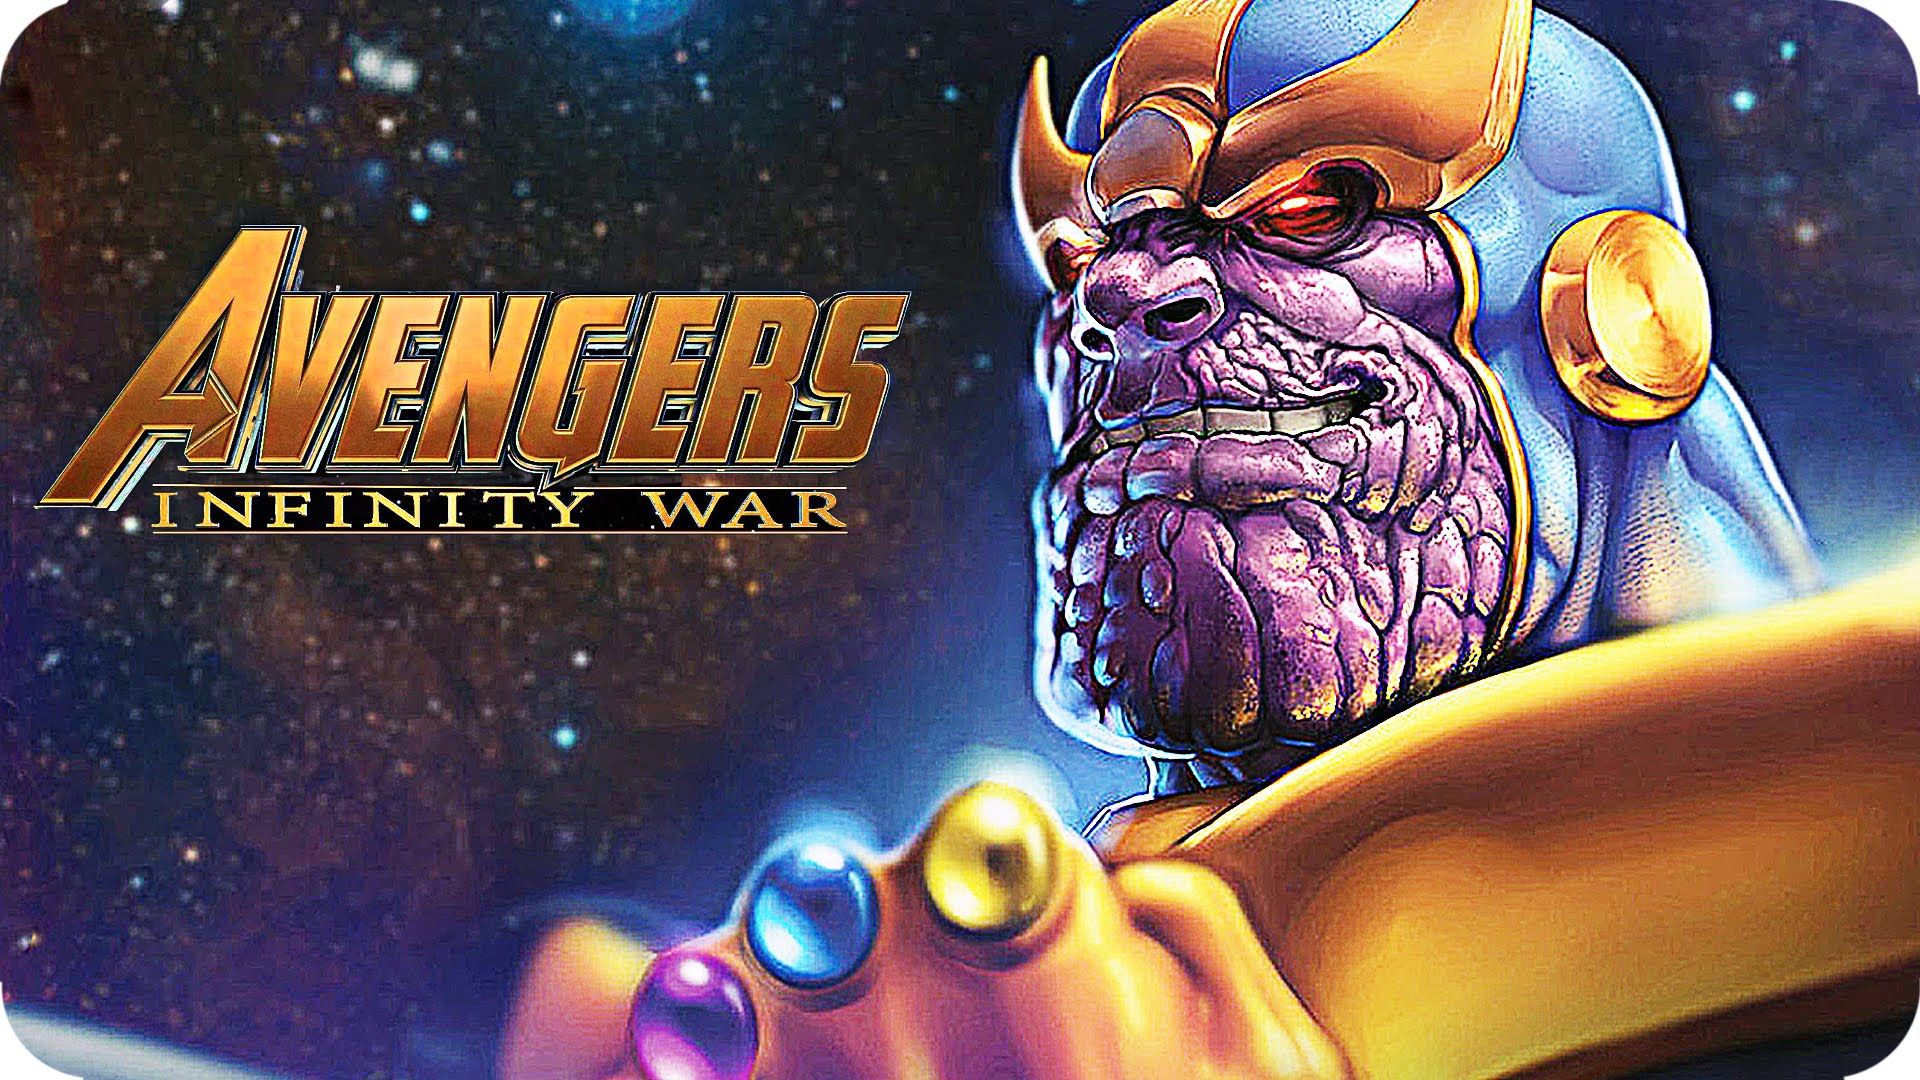 1920x1080 The Avengers 3 Infinity War Movie Preview 2 Thanos Explained 2018